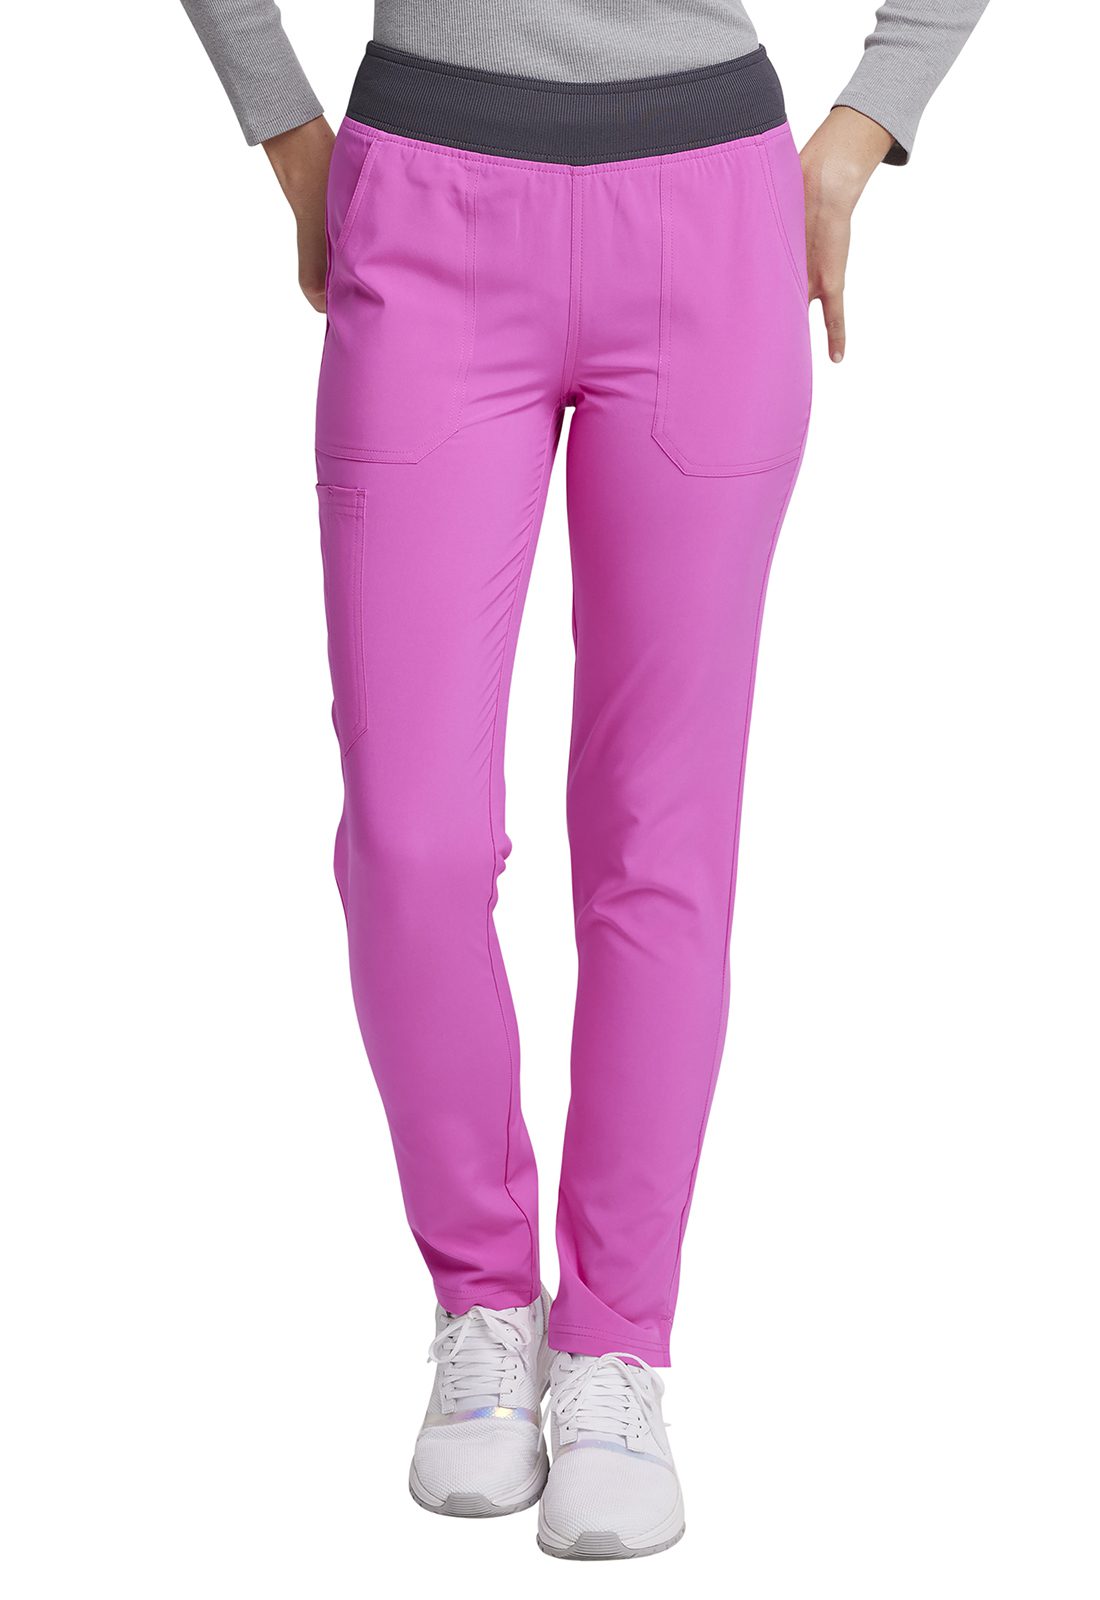 Womes Mid Rise Tapered Leg Pull-on Pant